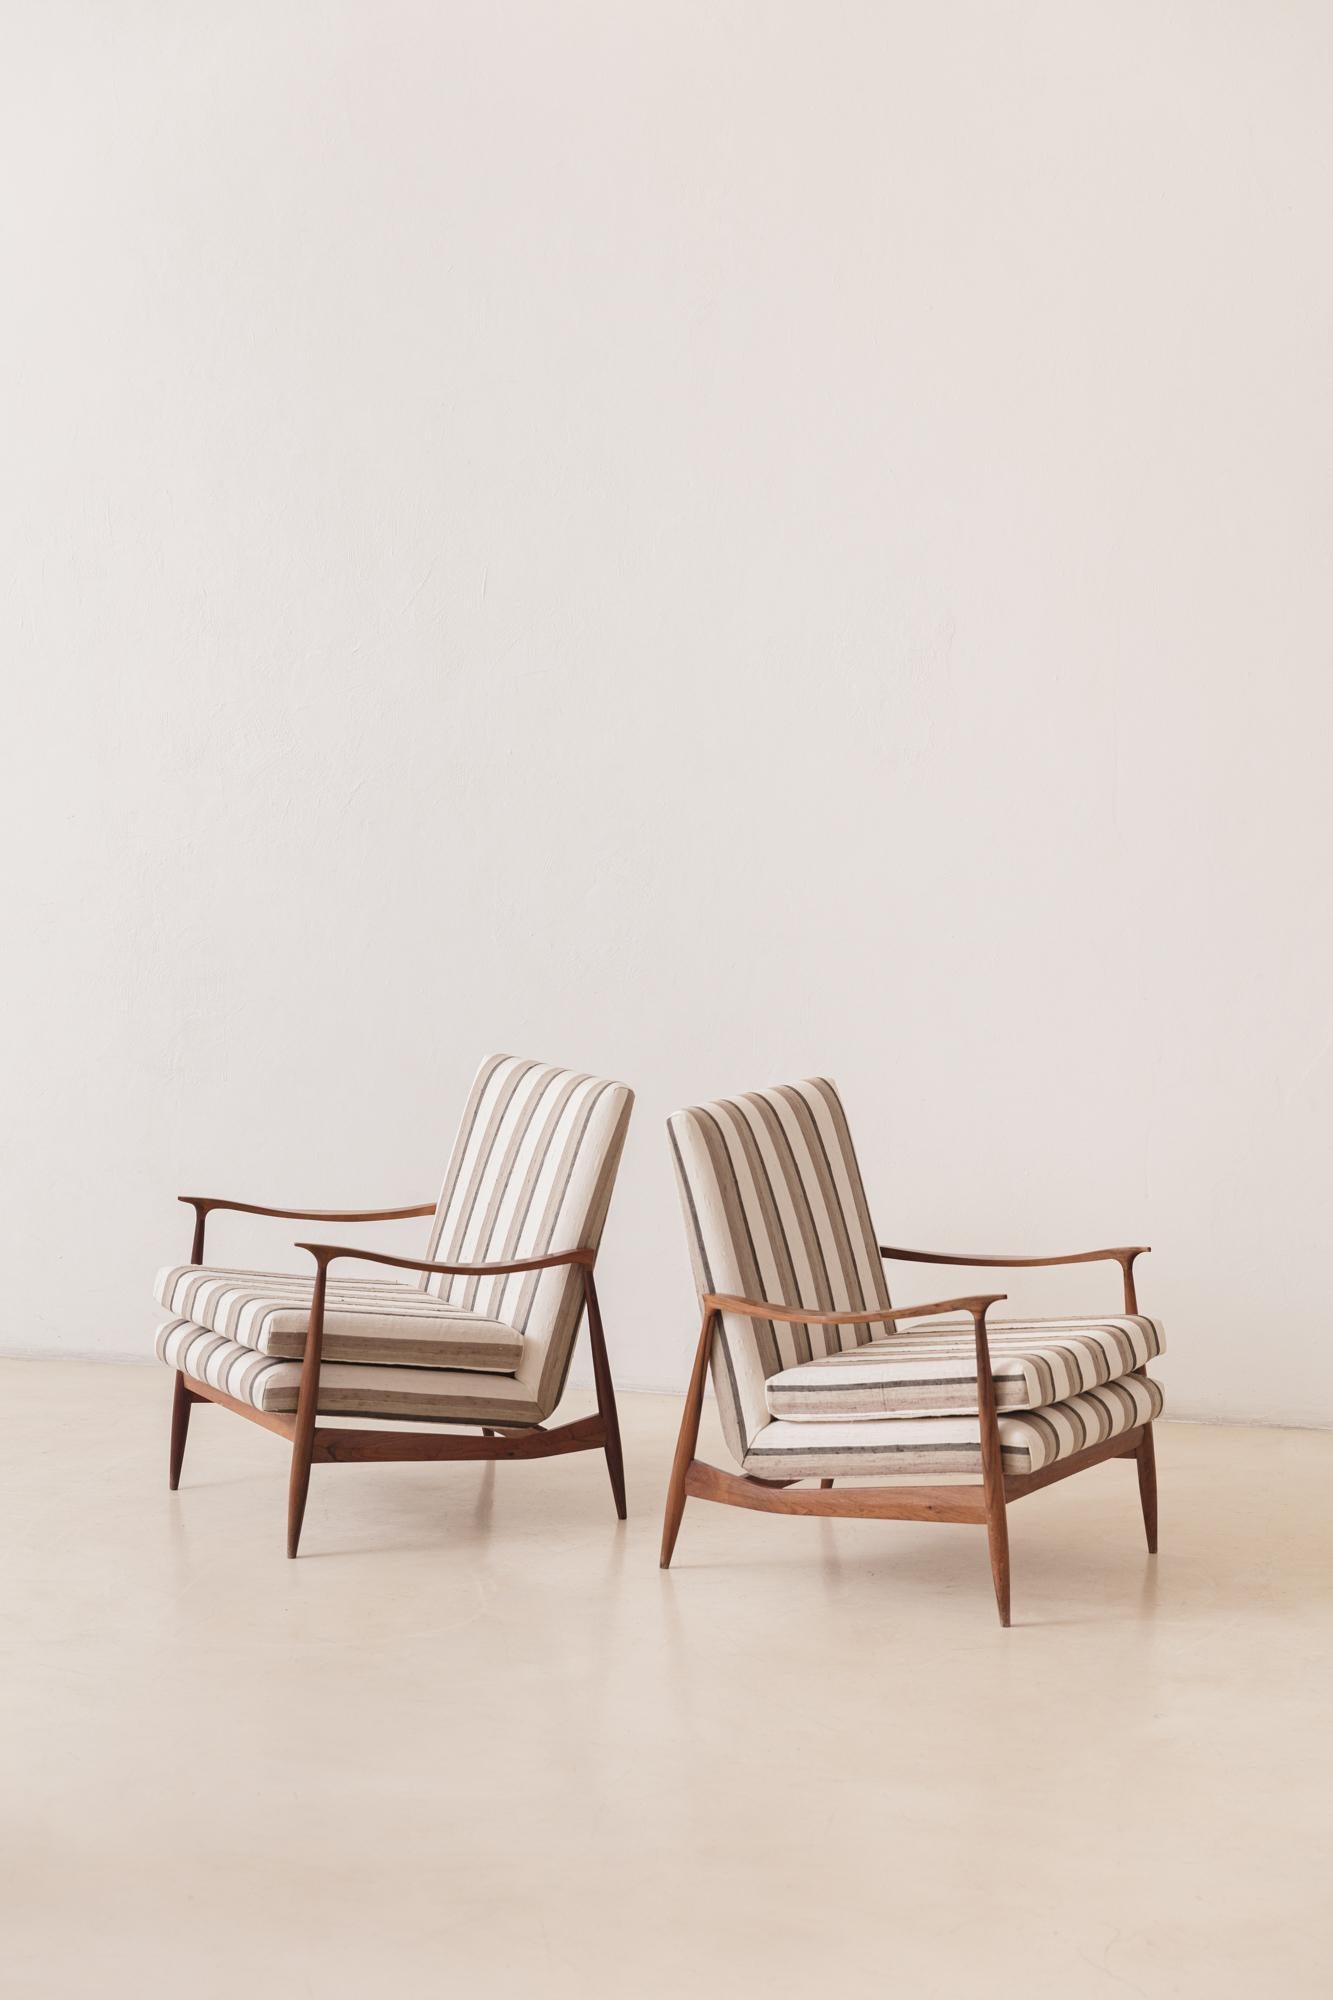 These Rosewood Armchairs were produced in the 1950s by the Brazilian company Móveis Cimo, a pioneer in Brazilian furniture industrialization.

Cimo's history starts in 1921 with a wood boxes factory, and ended in 1982 as the furniture factory